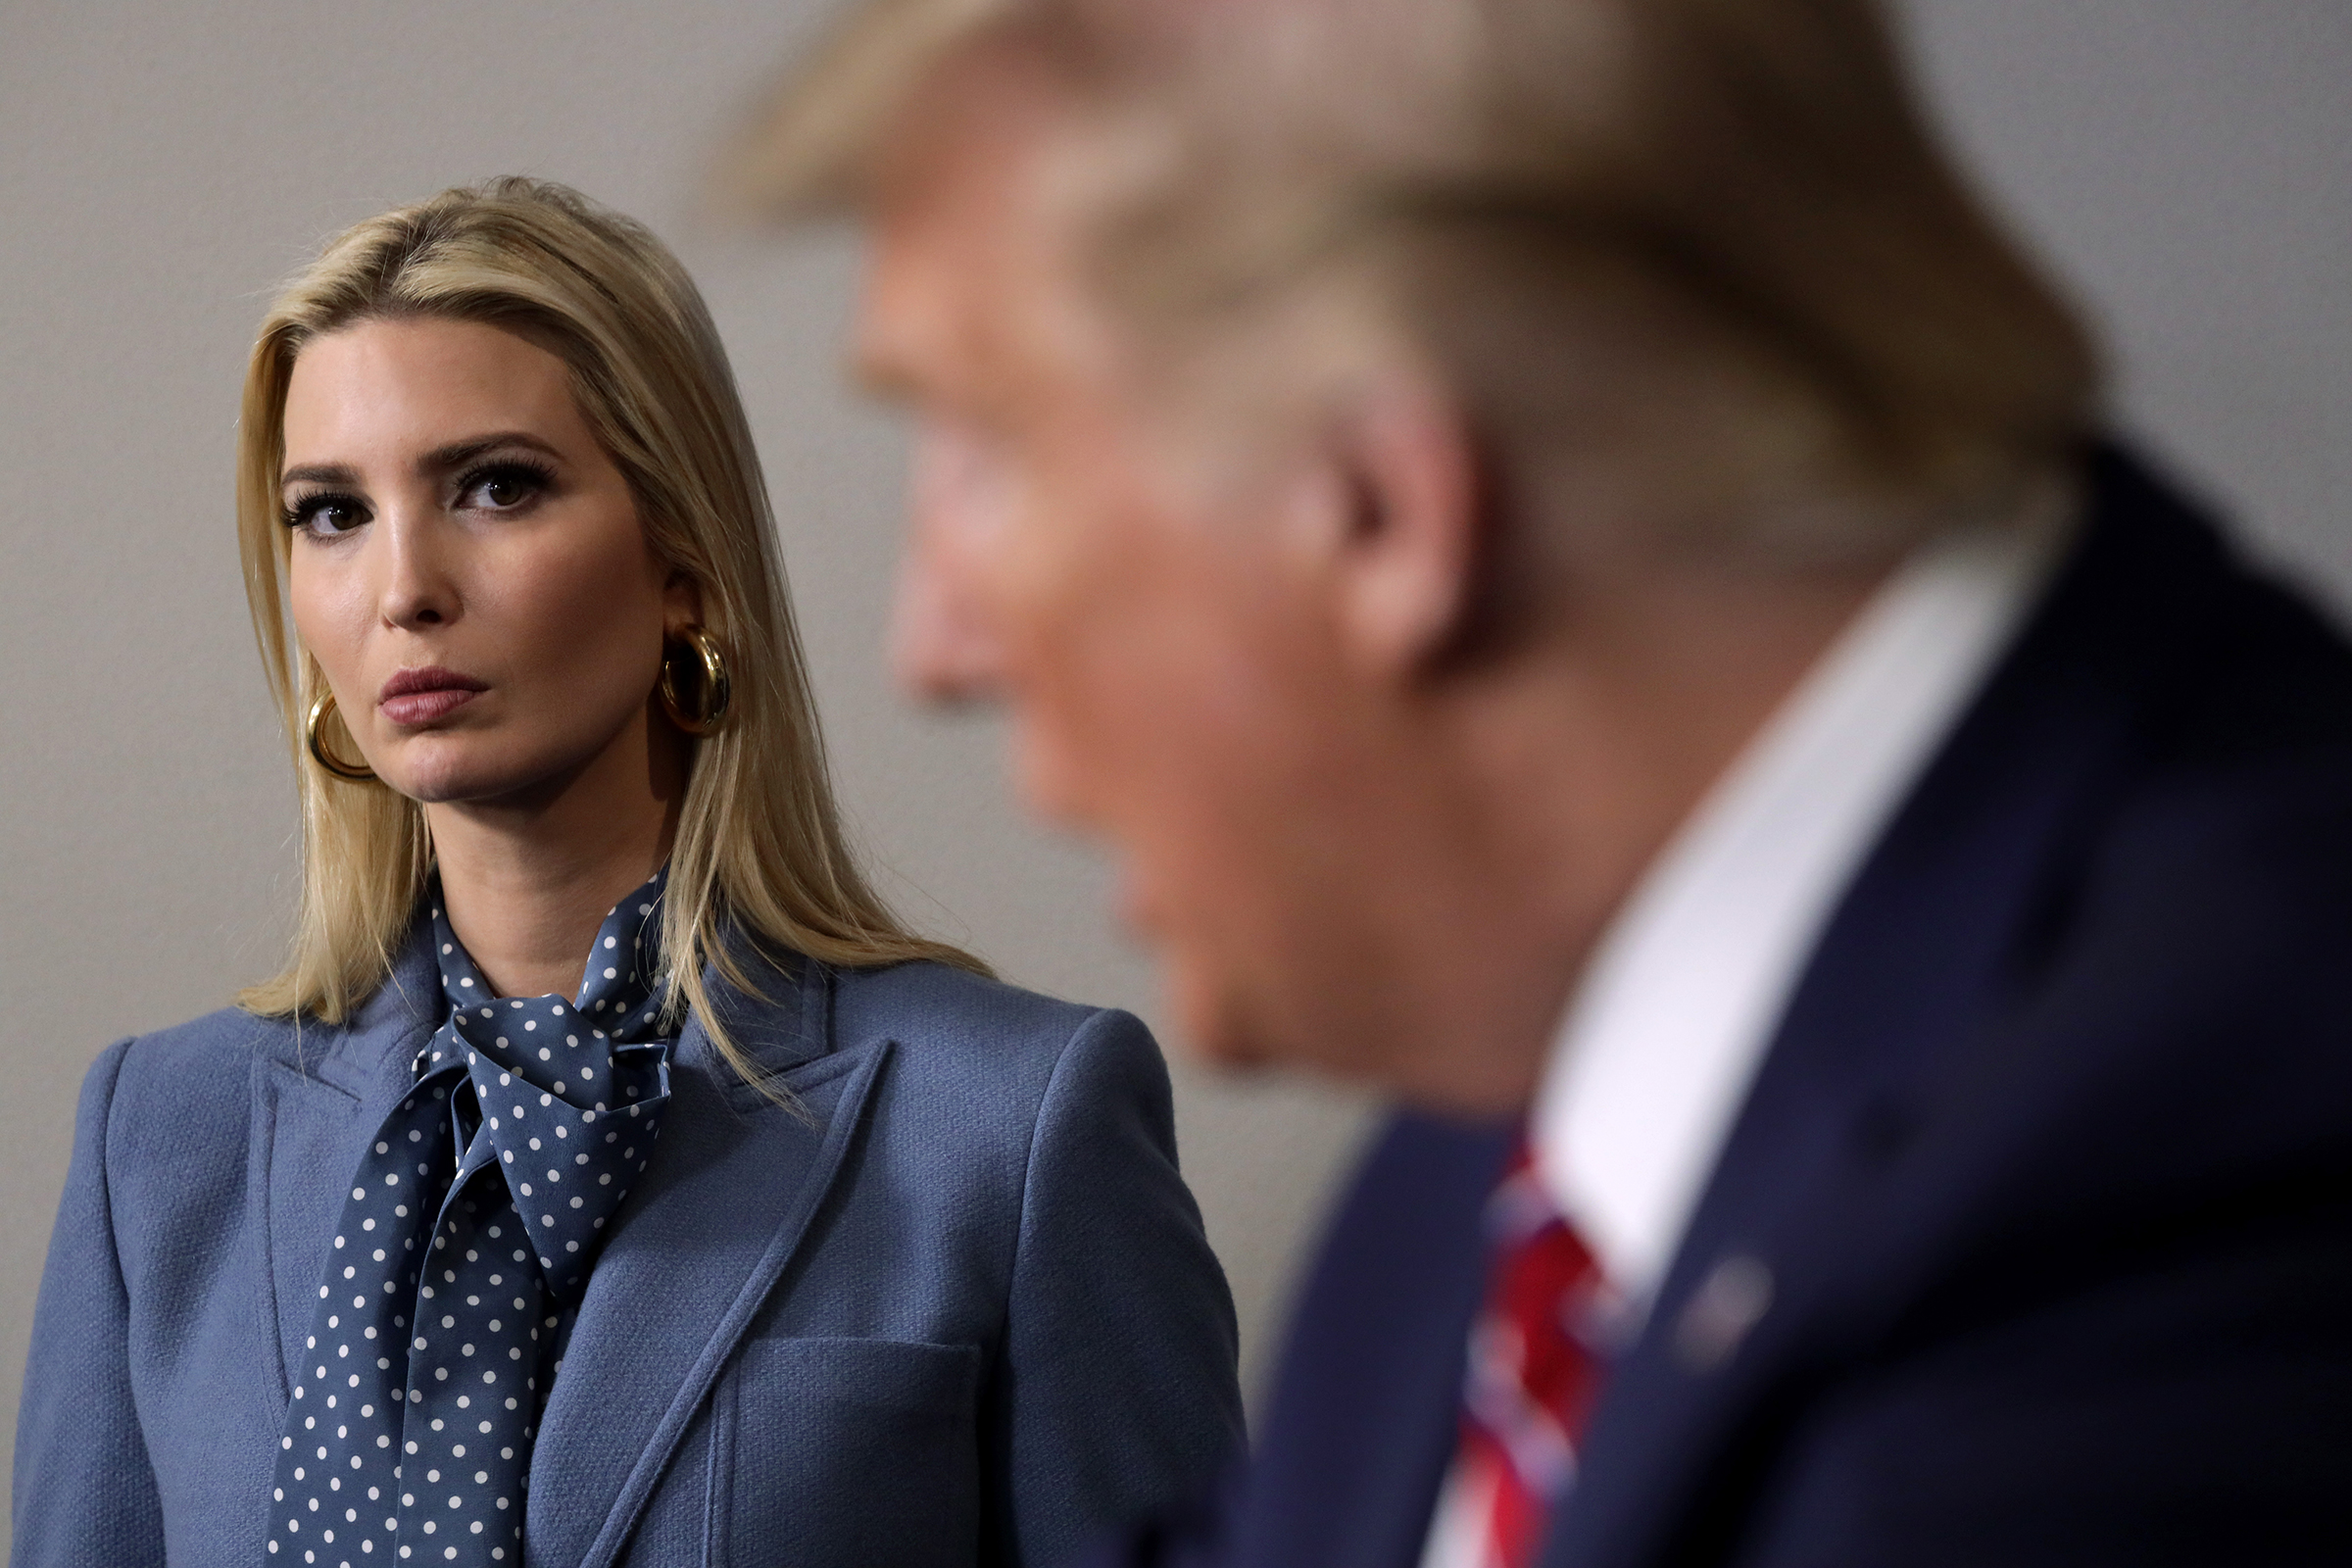 President Donald Trump speaks as his daughter and senior adviser Ivanka Trump looks on during a March 2020 news briefing at the White House.